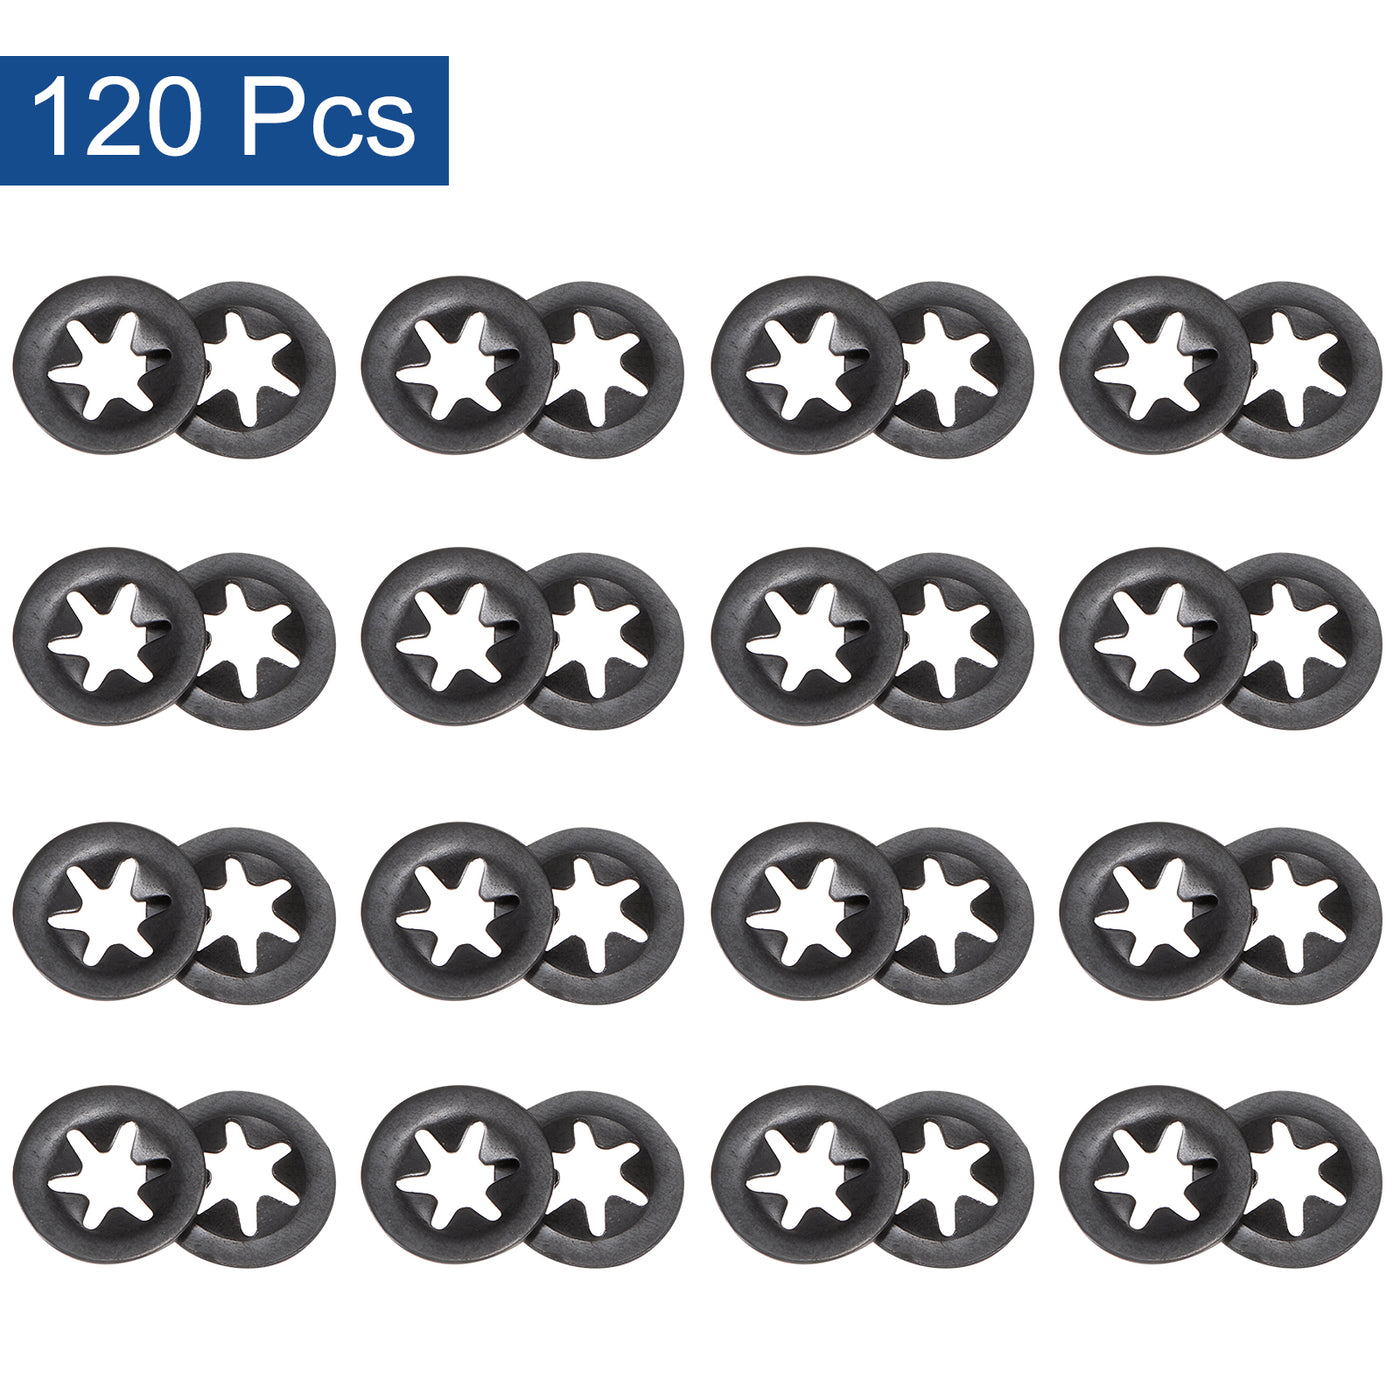 uxcell Uxcell 120pcs Internal Tooth Star Lock Washers M3 Push on Retaining Clips Quick Speed Locking Washers, 65Mn Steel Starlock Push Nuts